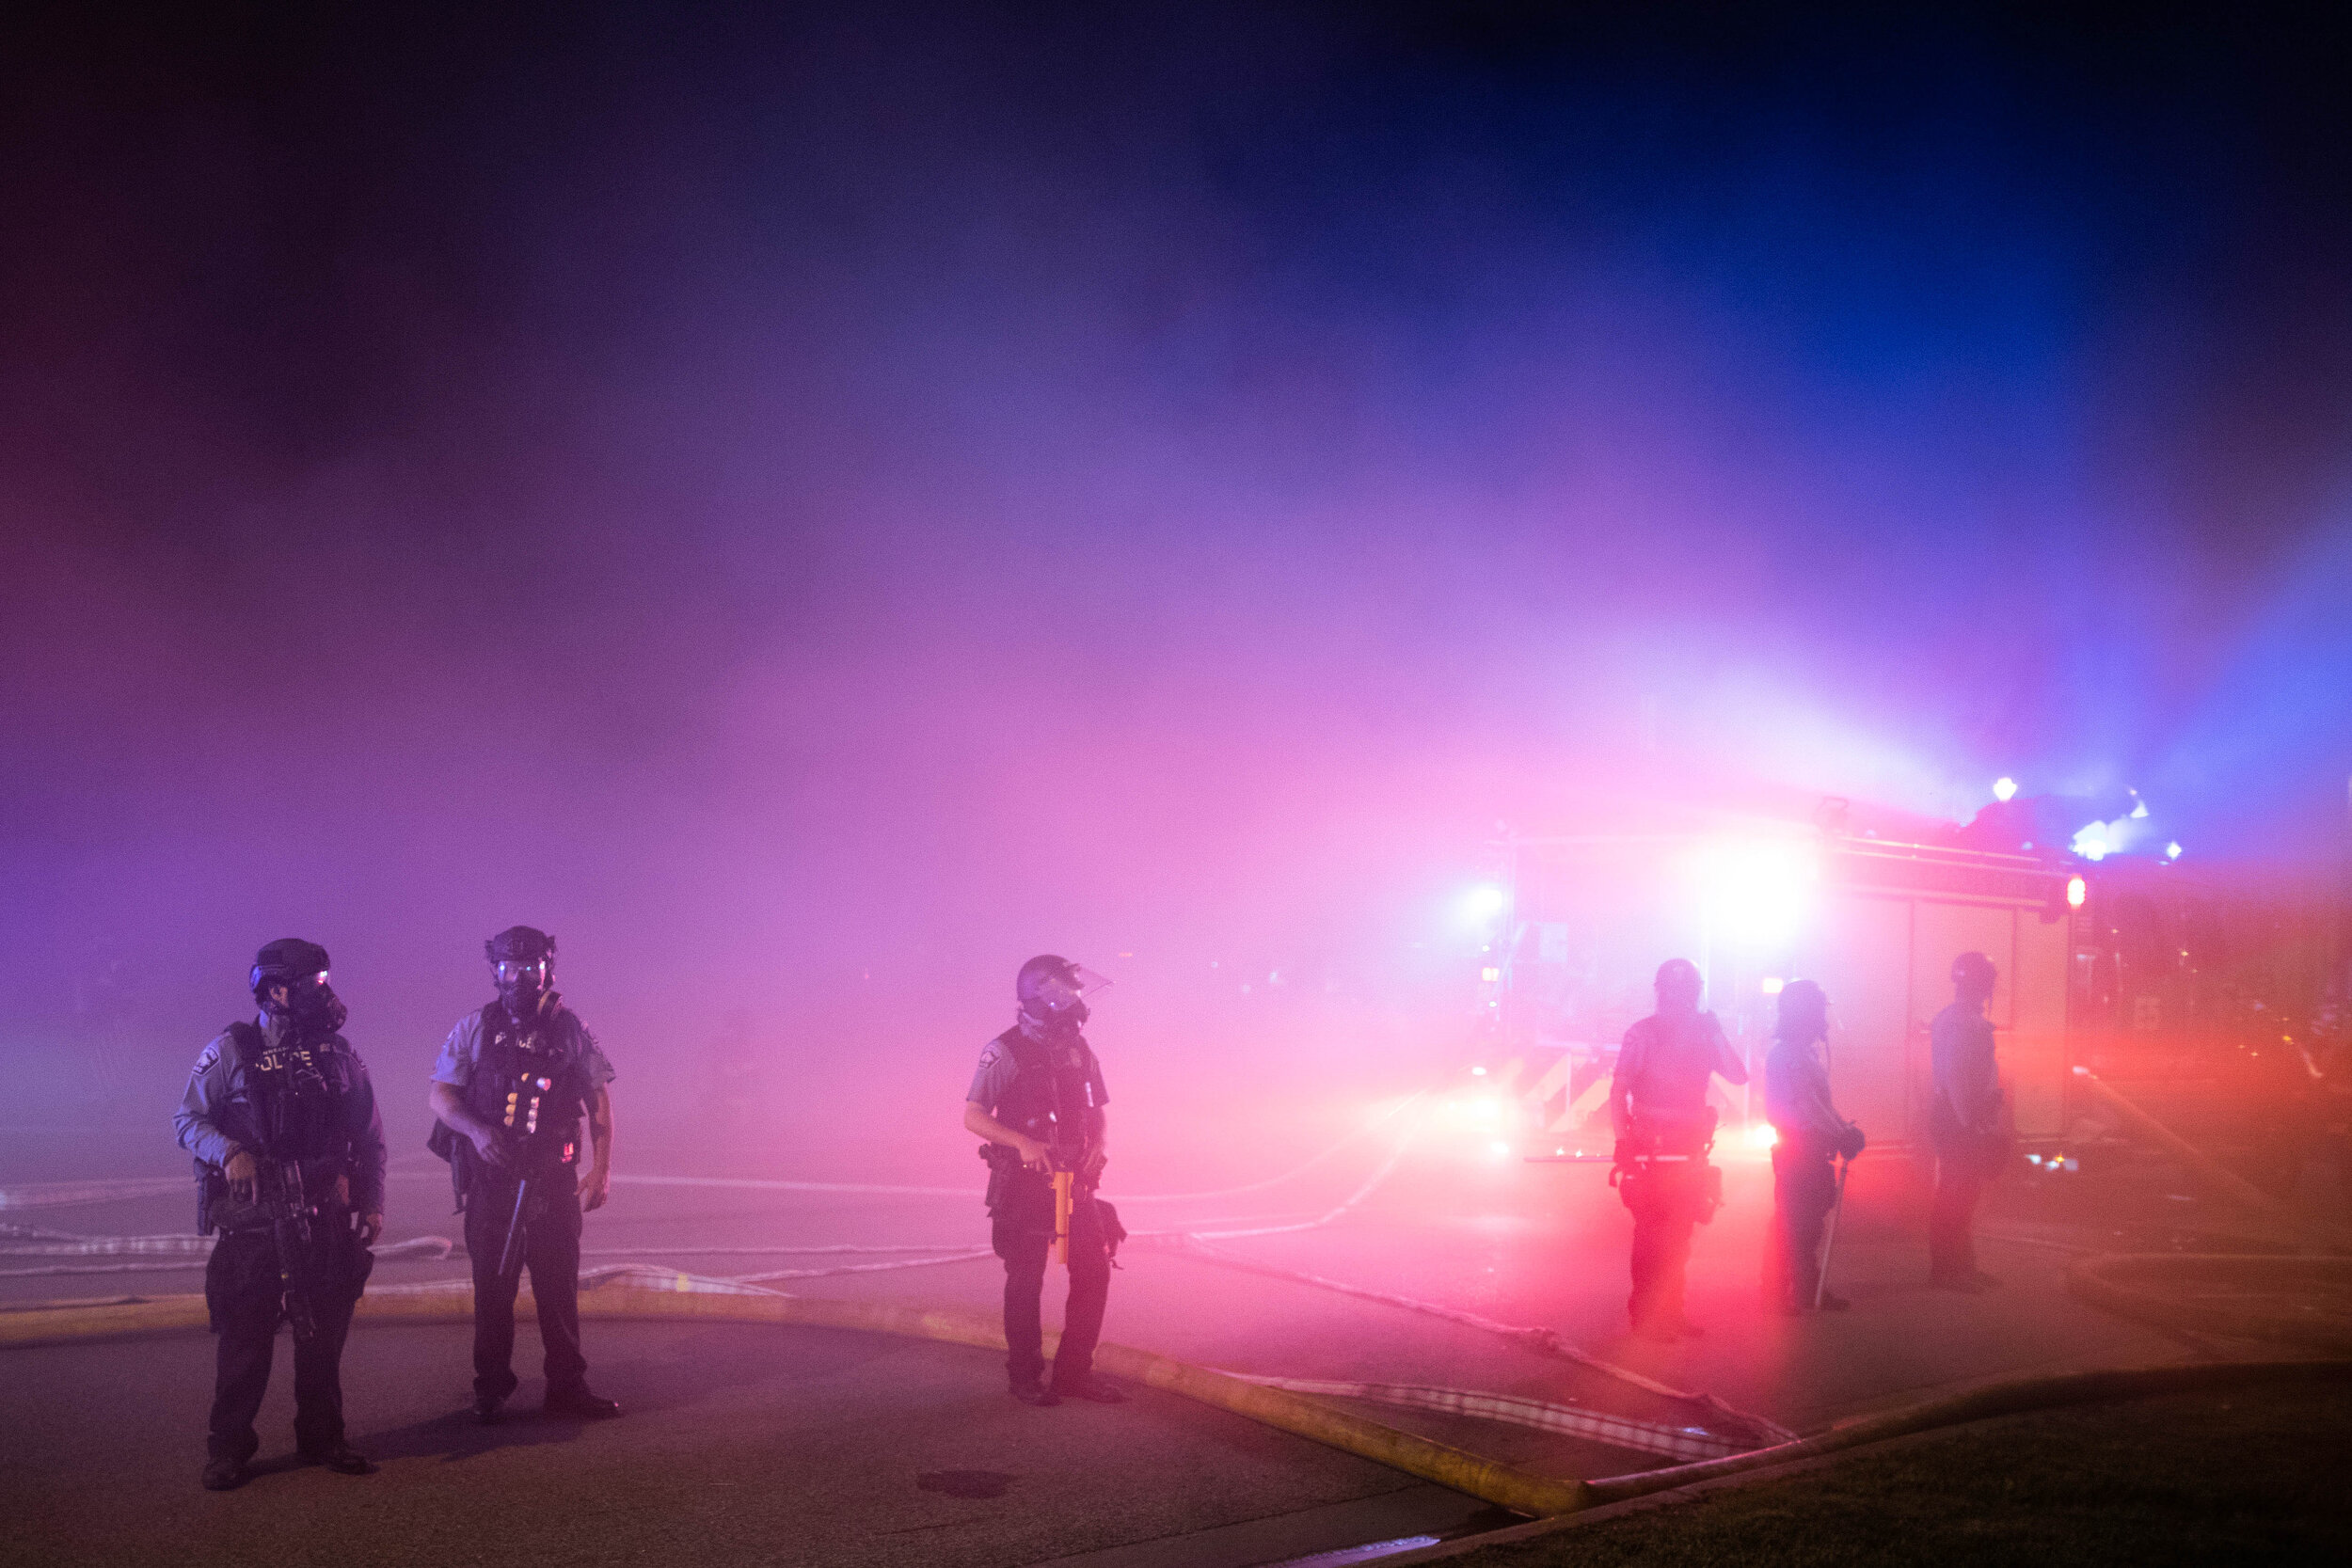  Police guard firefighters as they extinguish a fire set during a riot over the police killing of George Floyd in Minneapolis, Minnesota on May 28. 